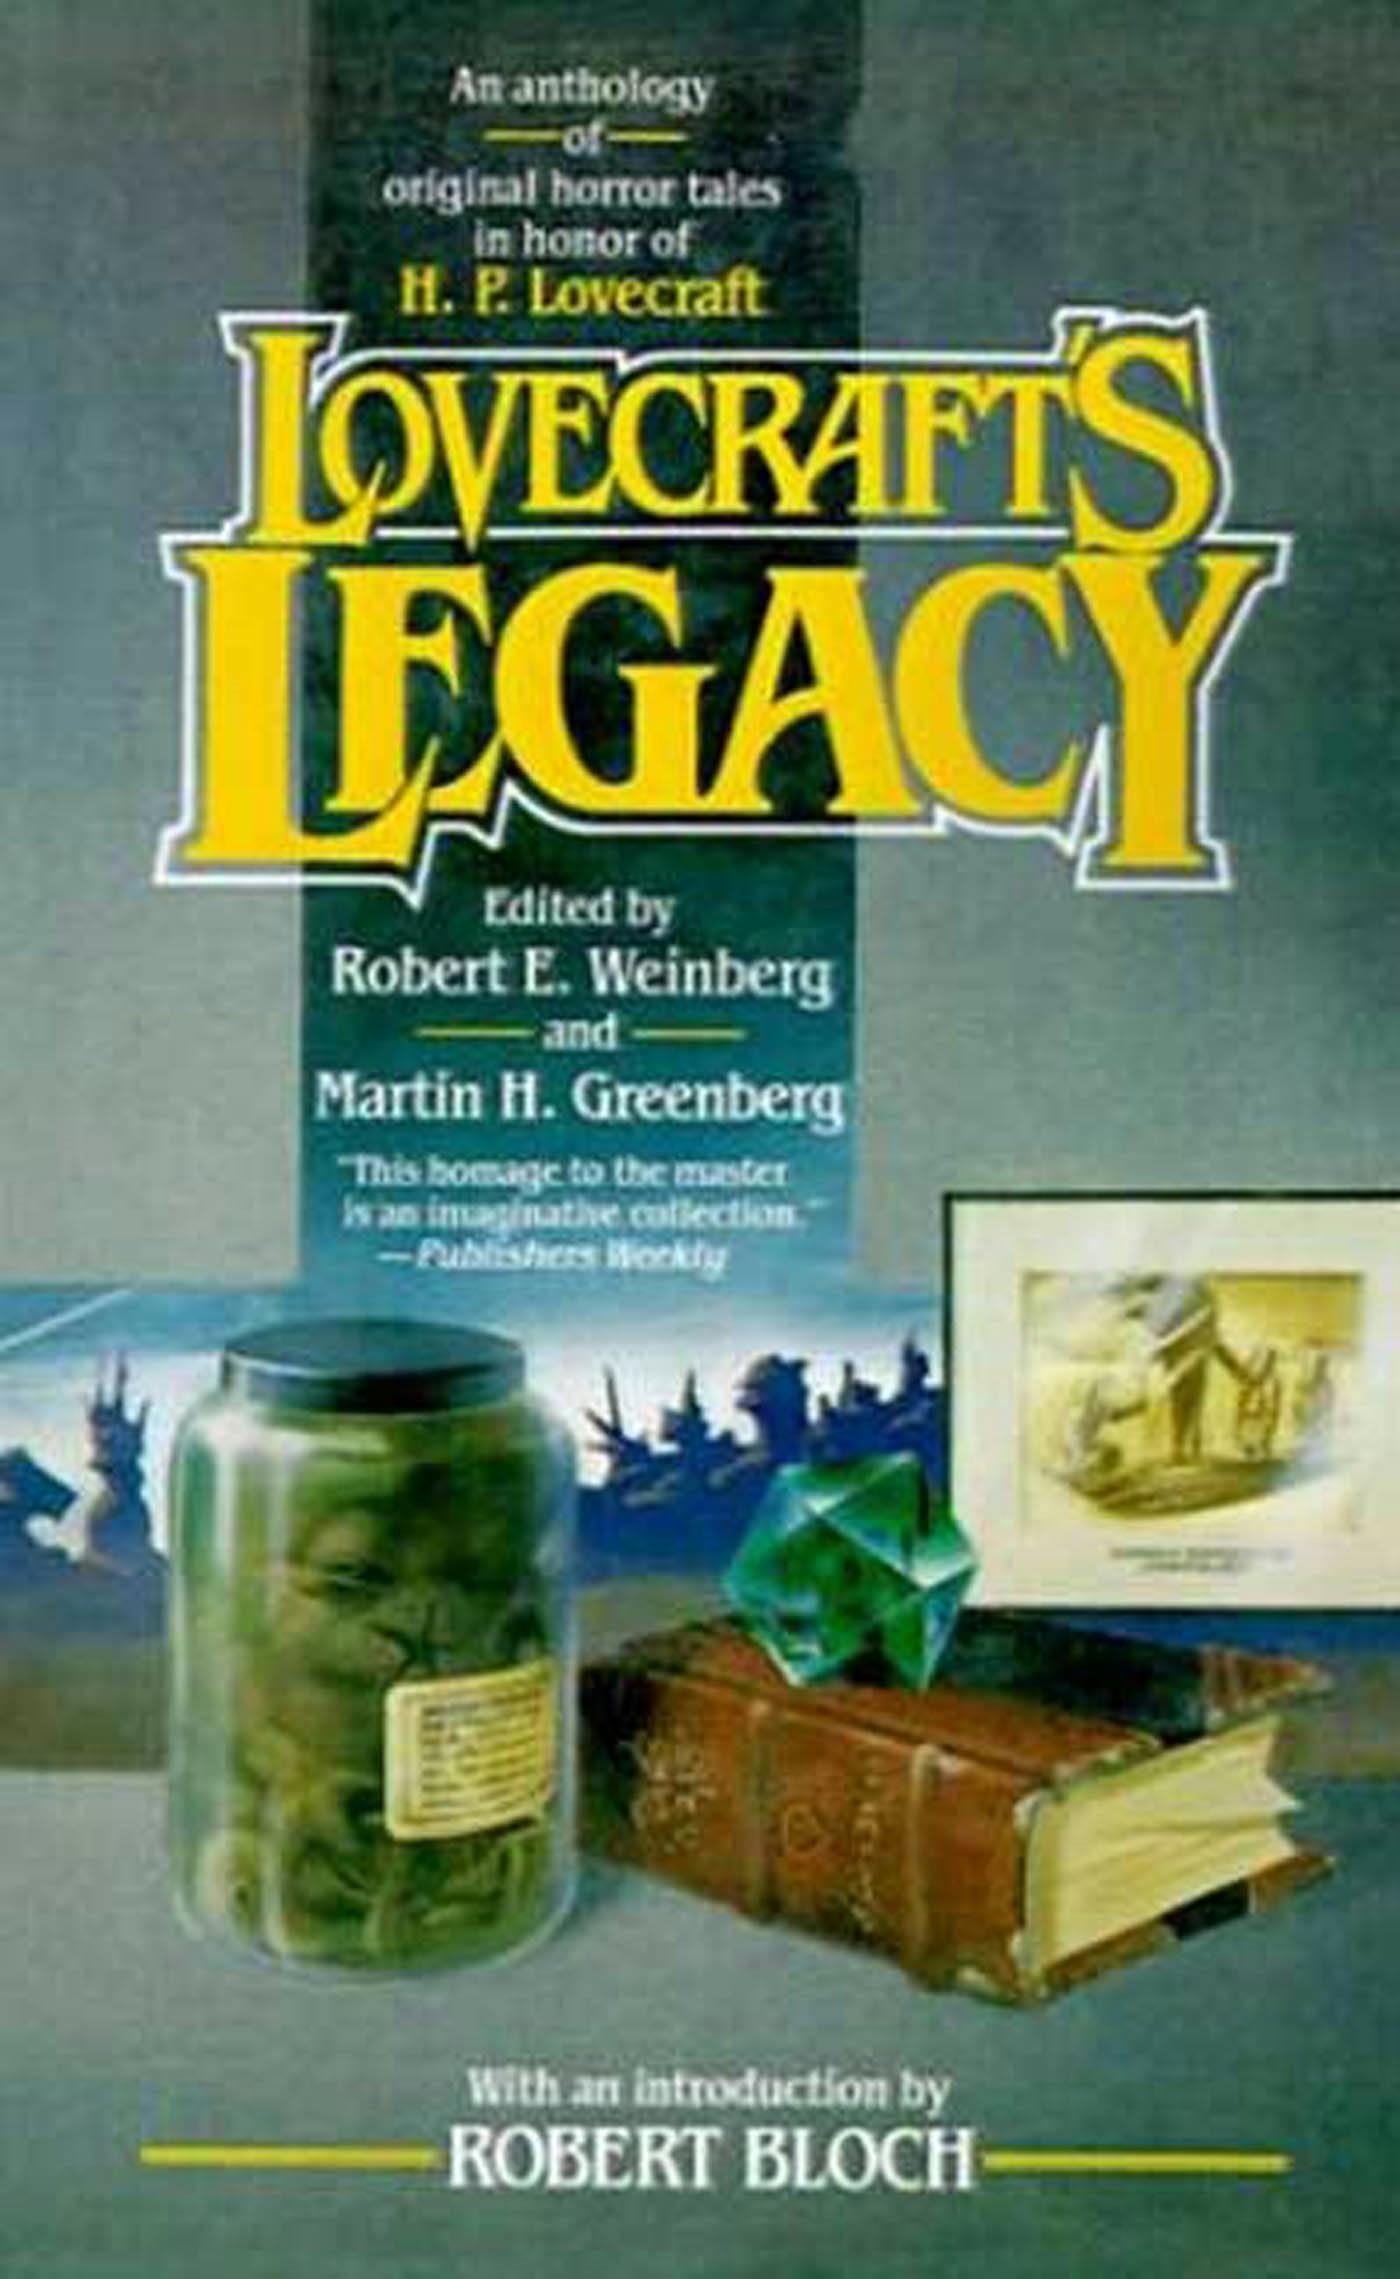 Cover for the book titled as: Lovecraft's Legacy